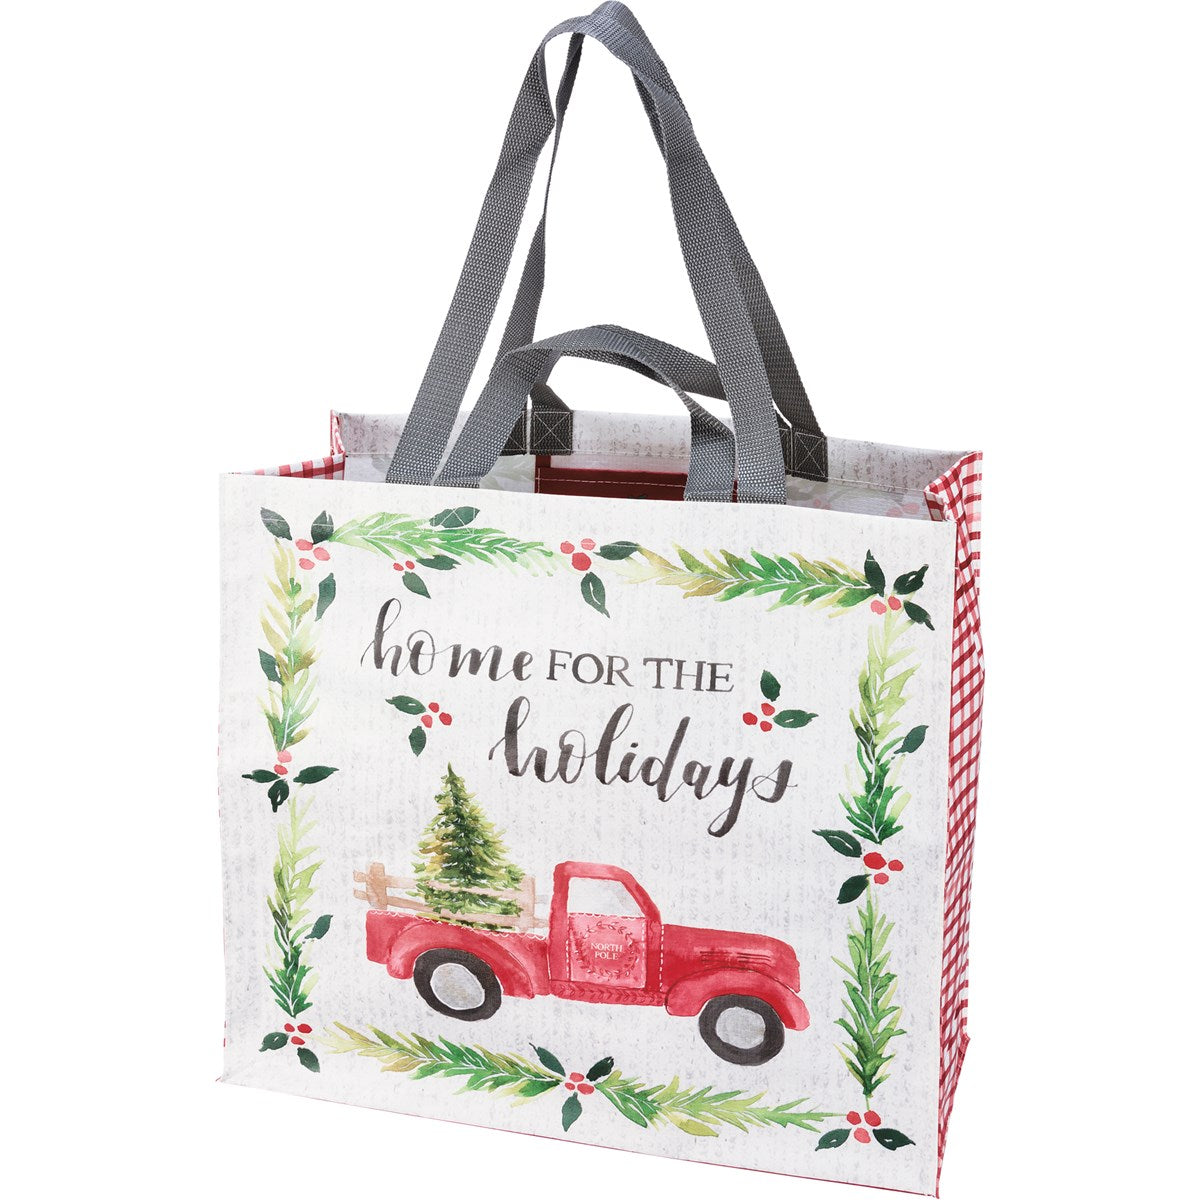 Home For The Holidays Red Truck With Tree Christmas Market Tote Bag